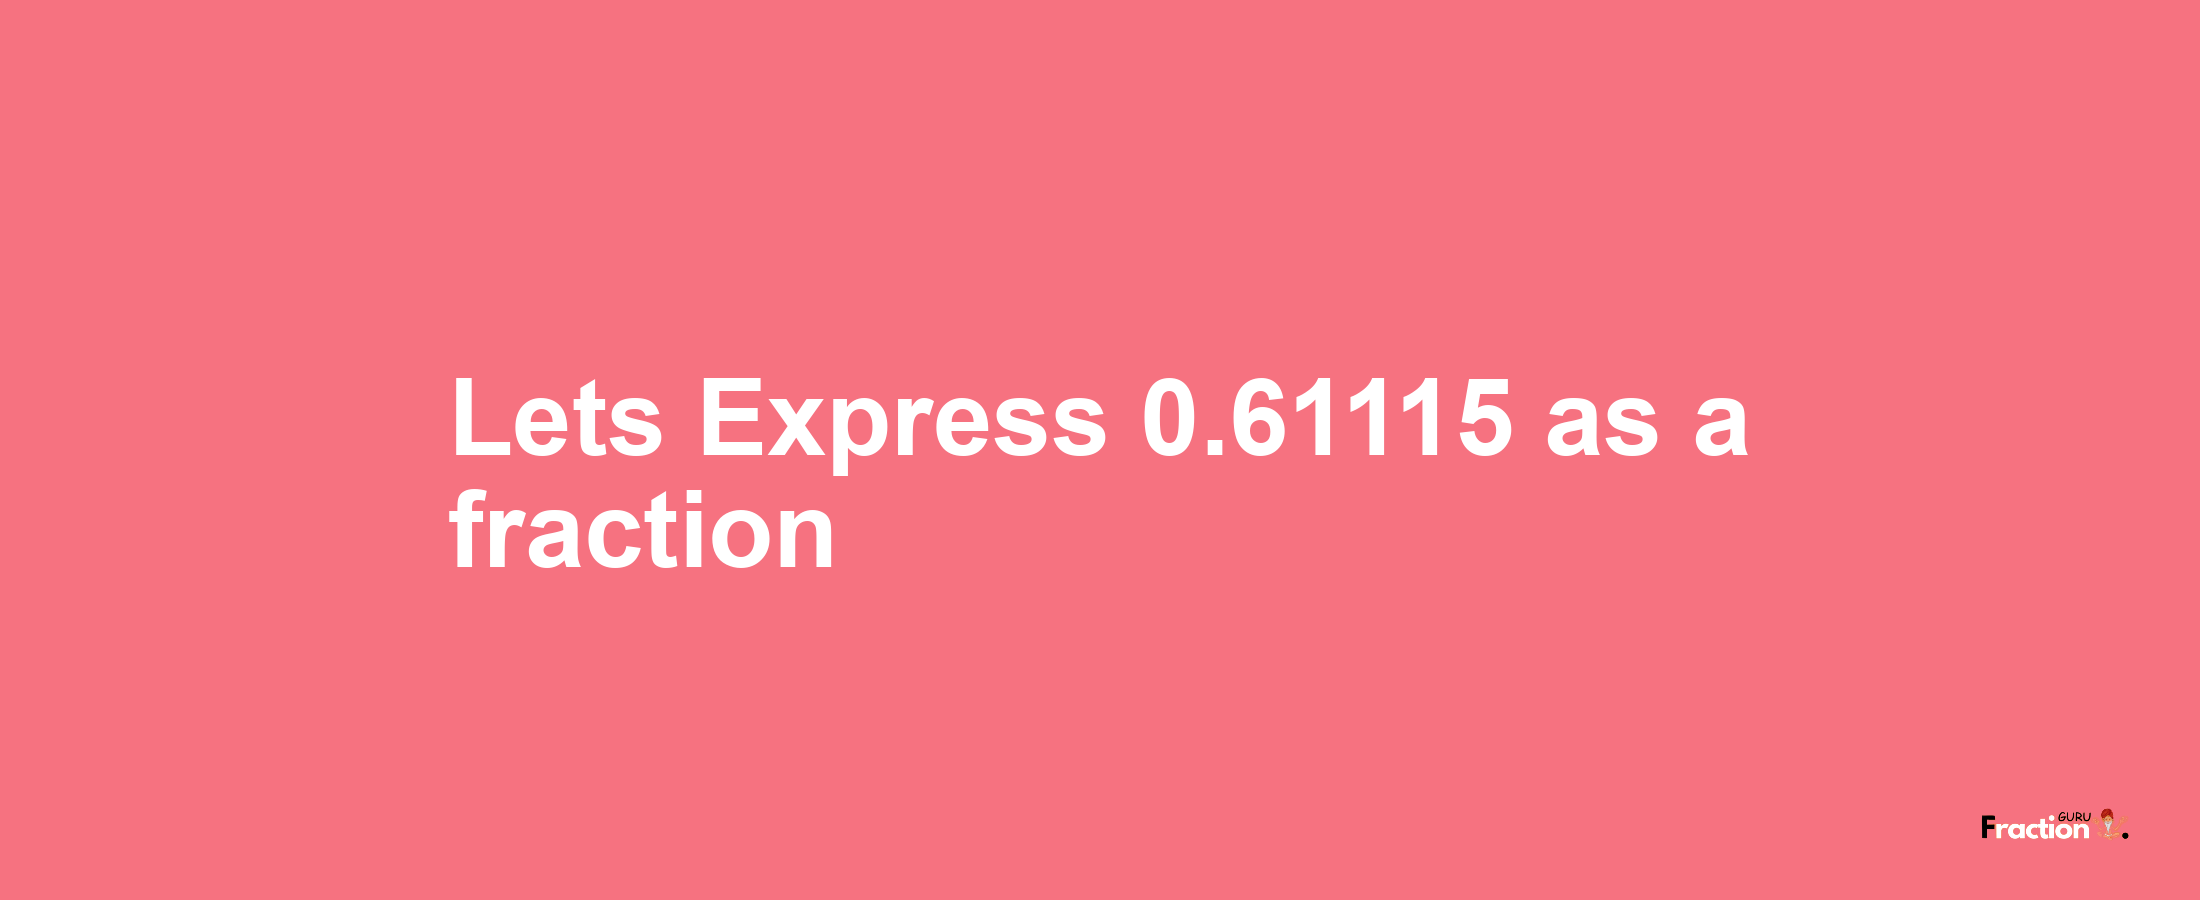 Lets Express 0.61115 as afraction